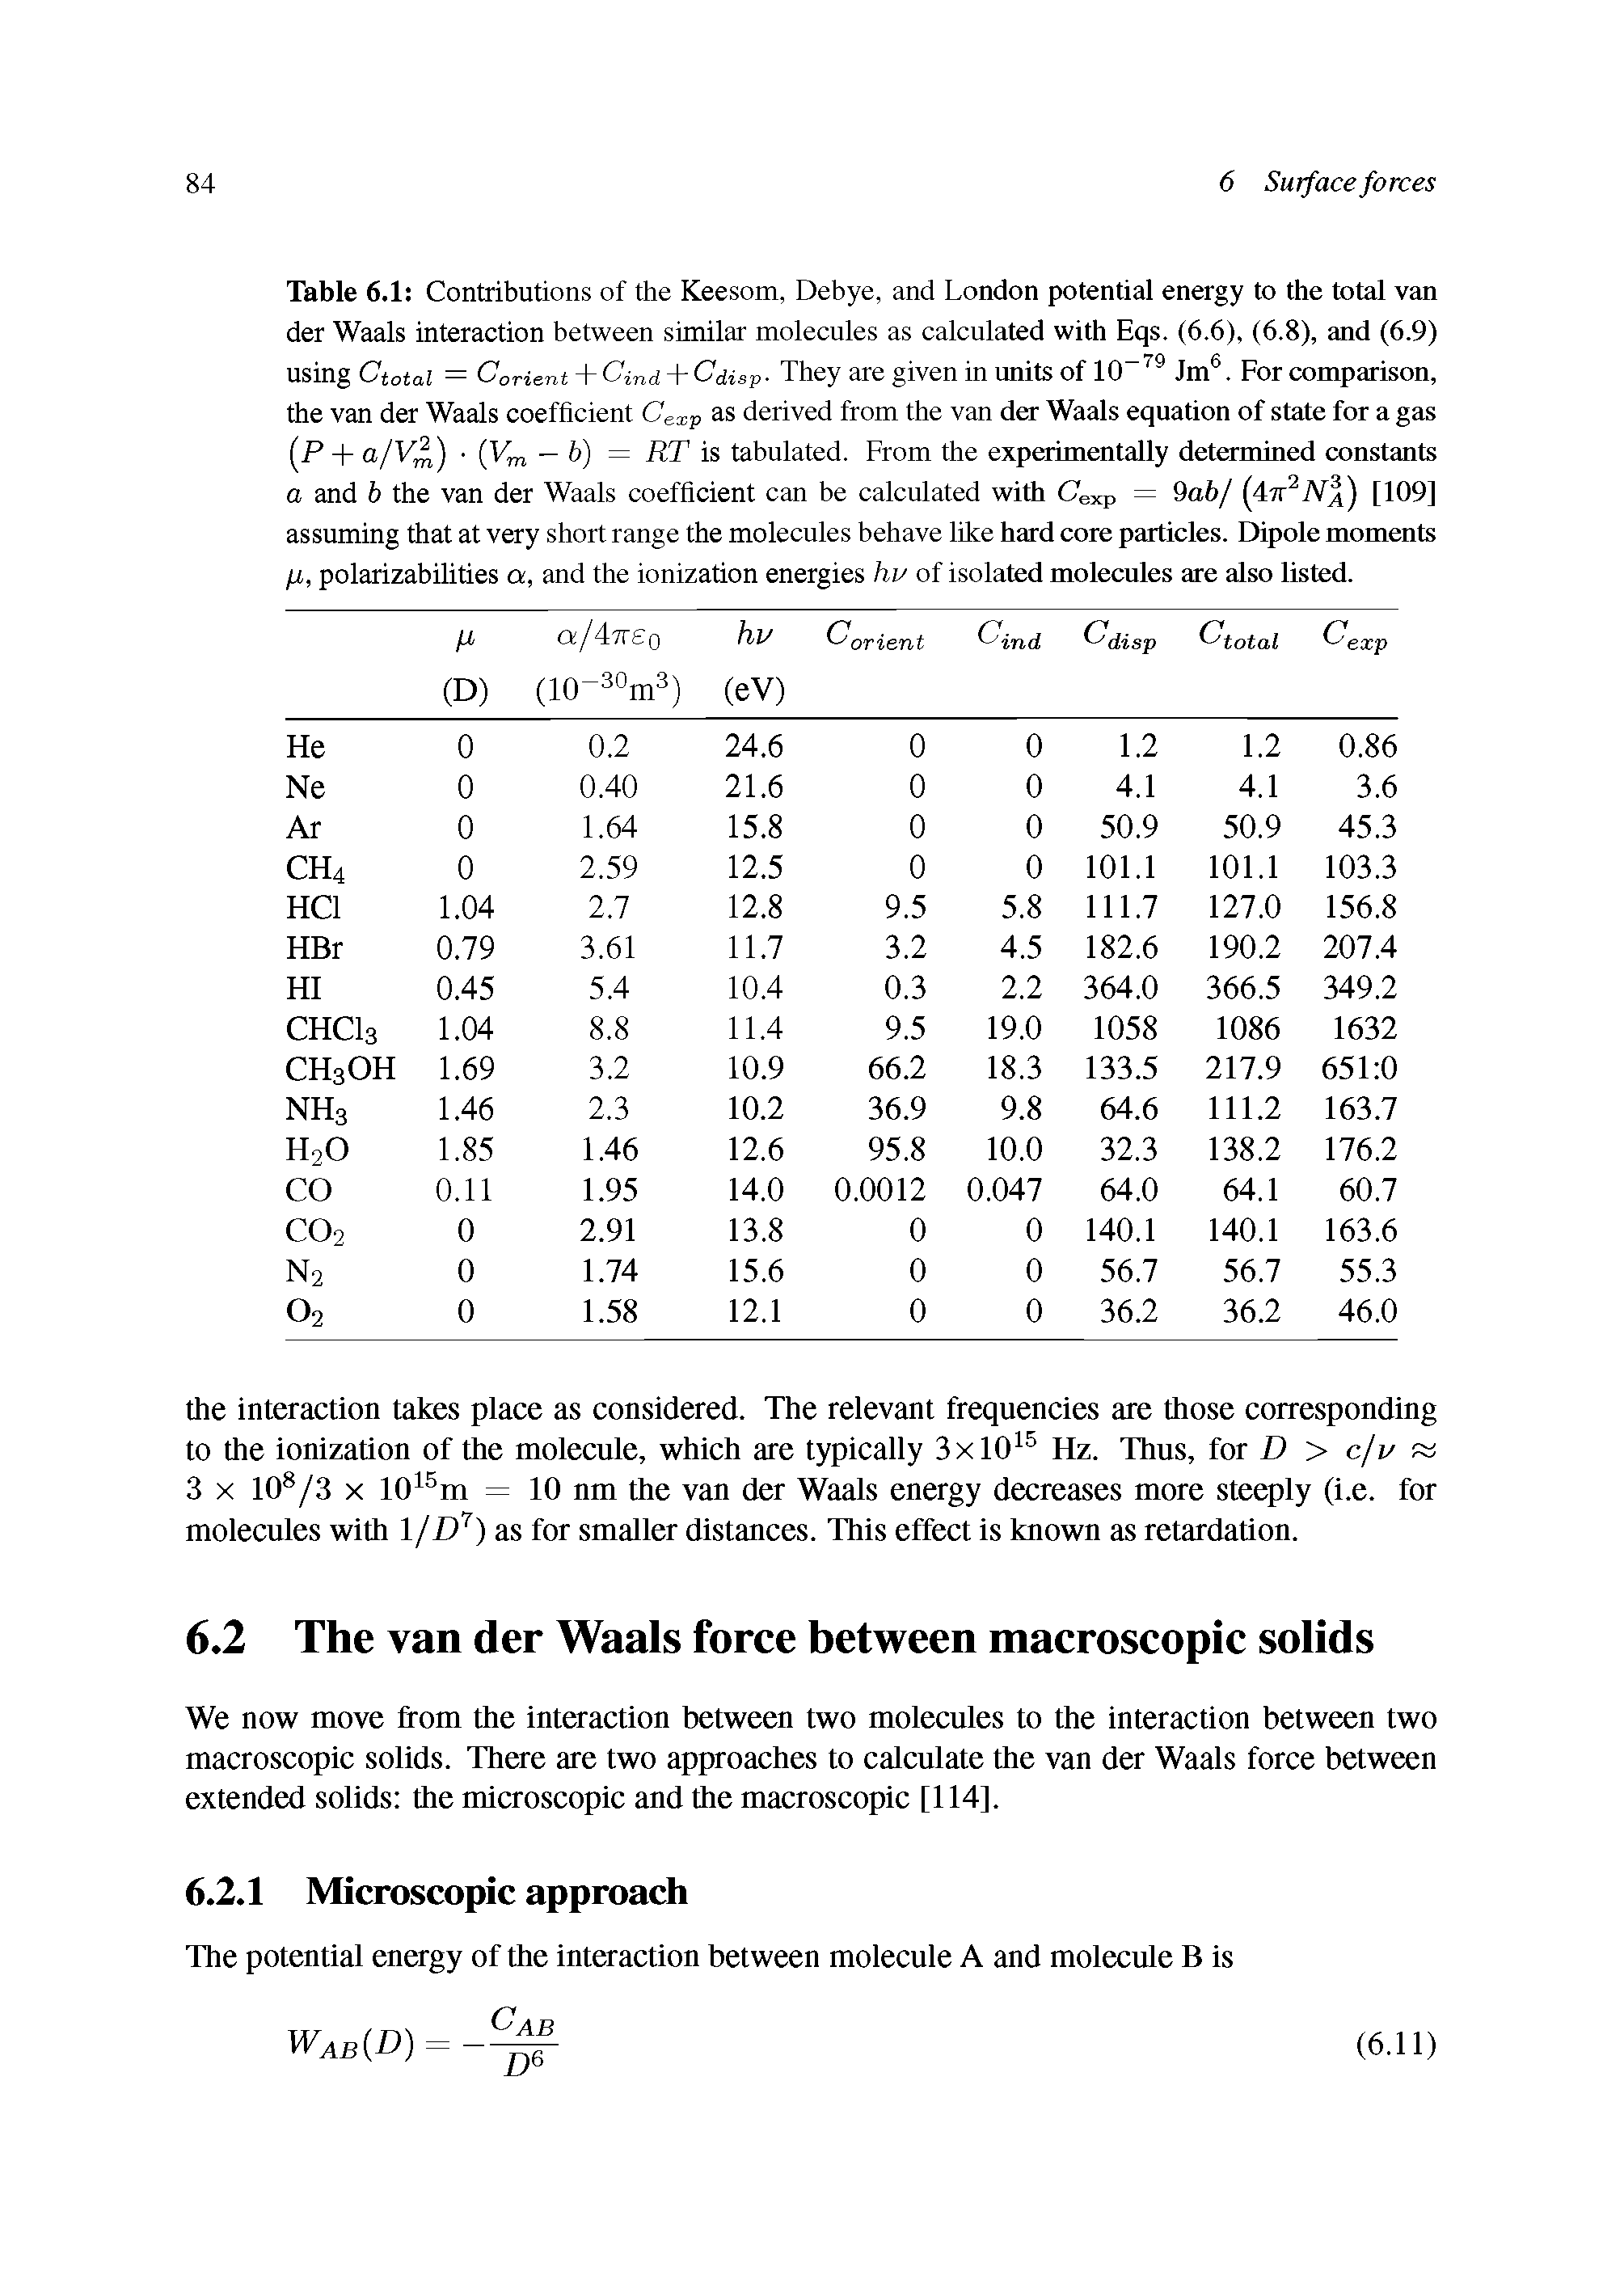 Table 6.1 Contributions of the Keesom, Debye, and London potential energy to the total van der Waals interaction between similar molecules as calculated with Eqs. (6.6), (6.8), and (6.9) using Ctotal = Corient + Cind + Cdisp- They are given in units of 10-79 Jm6. For comparison, the van der Waals coefficient Cexp as derived from the van der Waals equation of state for a gas (P + a/V fj (Vm — b) = RT is tabulated. From the experimentally determined constants a and b the van der Waals coefficient can be calculated with Cexp = 9ab/ (47T21V ) [109] assuming that at very short range the molecules behave like hard core particles. Dipole moments /u, polarizabilities a, and the ionization energies ho of isolated molecules are also listed.